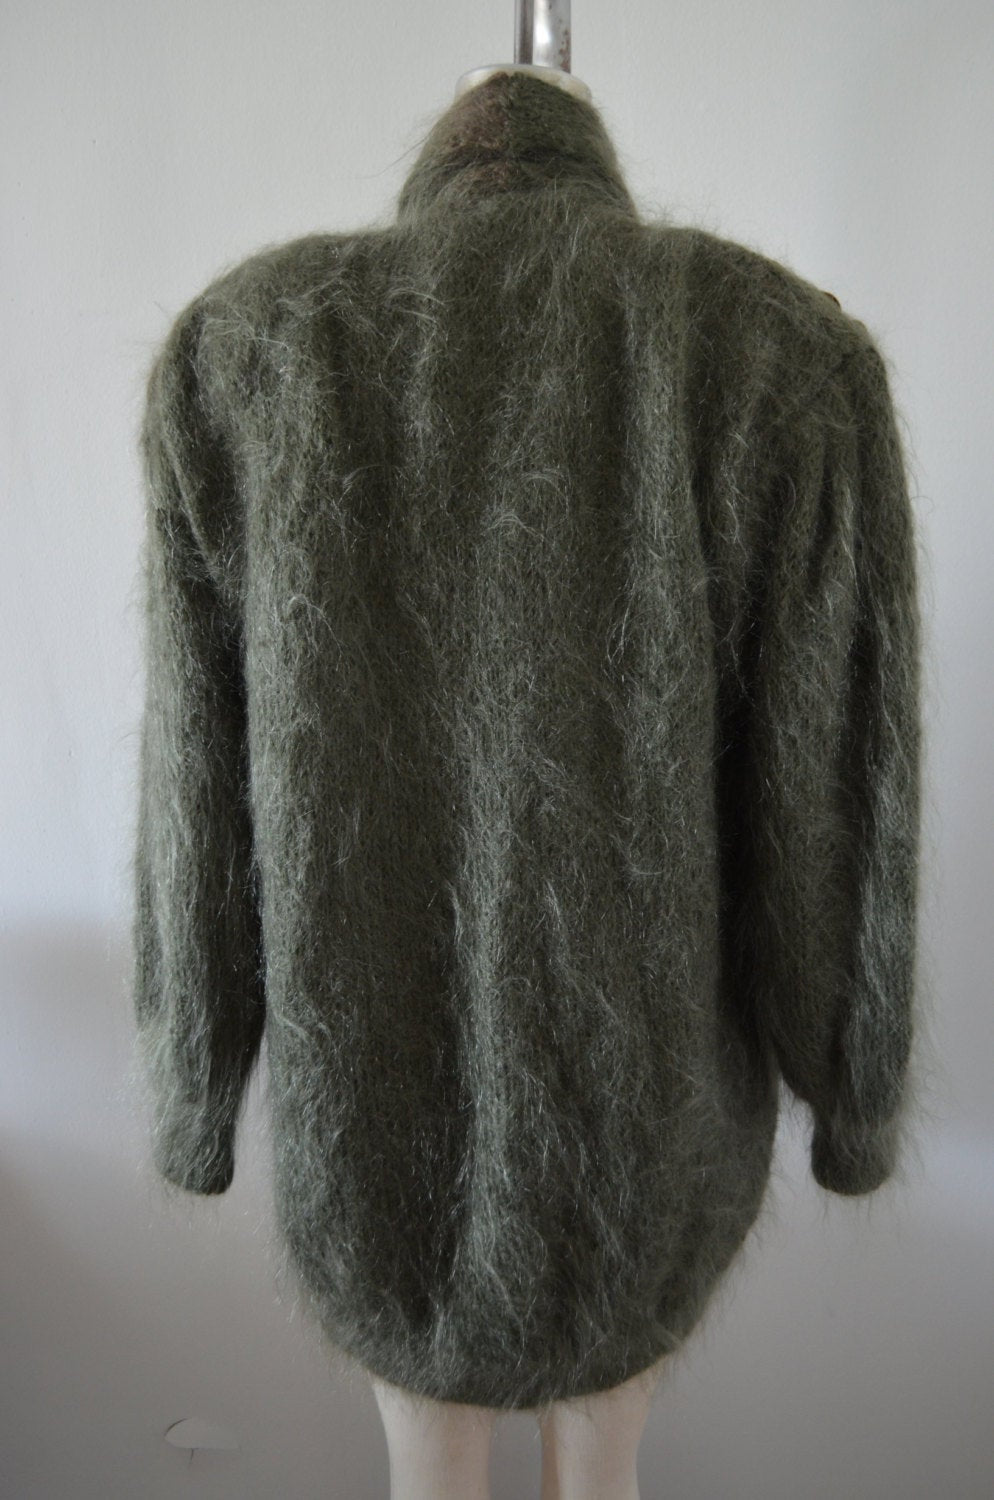 Slouchy Mohair Long Sequins Beaded Army Green Cardigan Outwear Coat Sweater 80S Fall